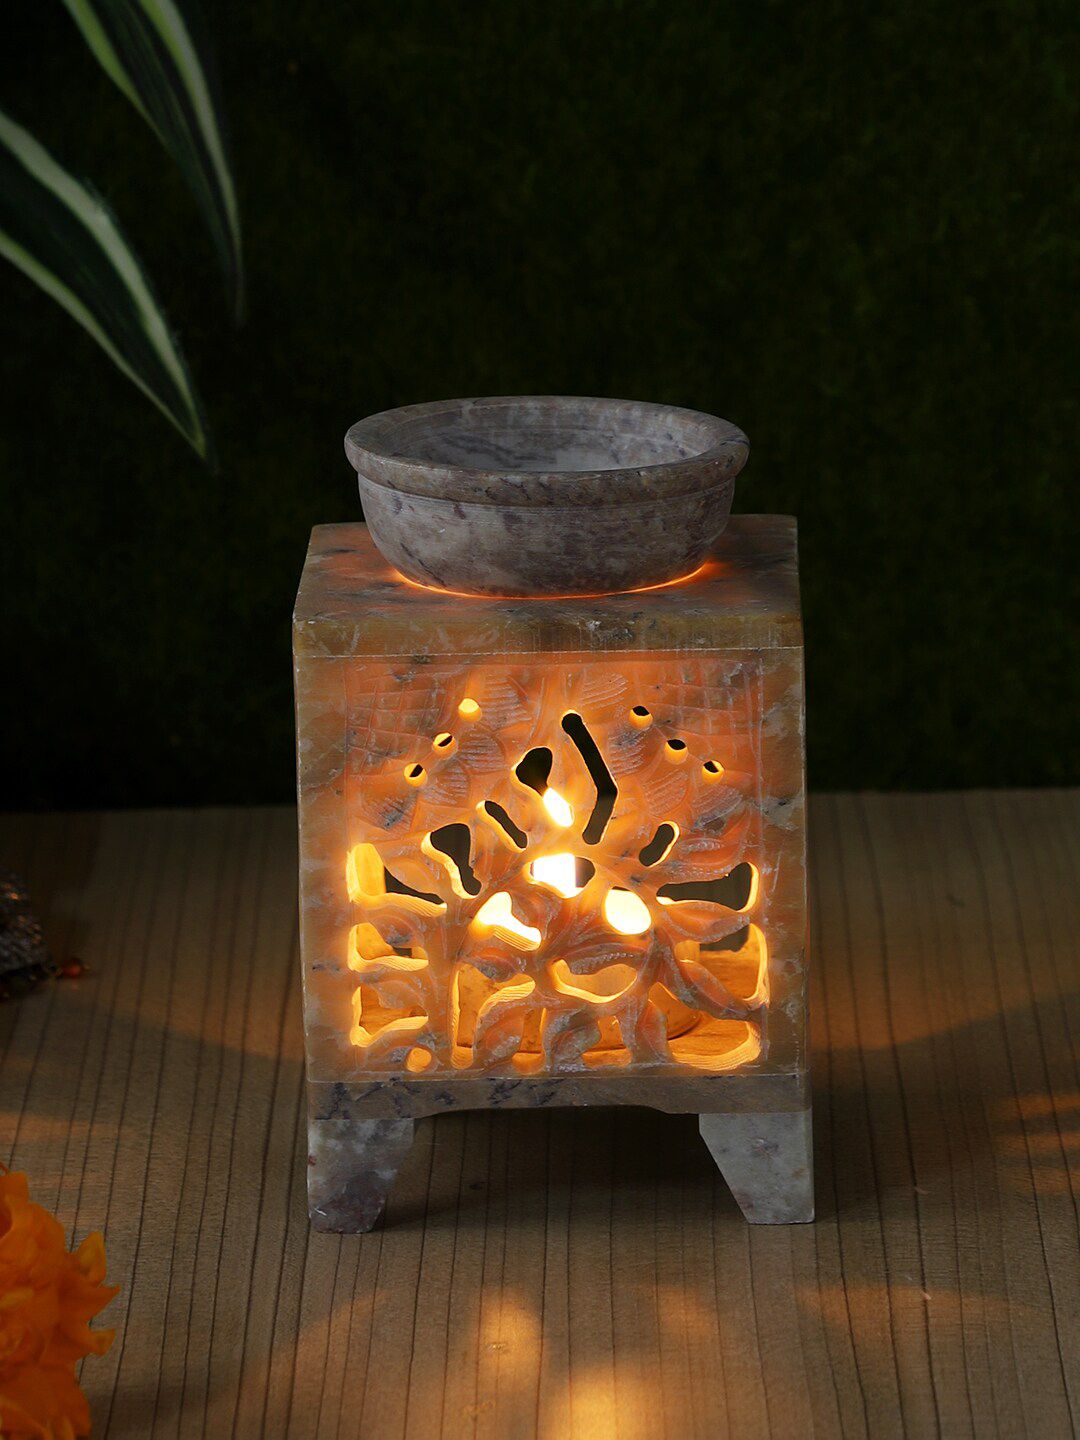 Aapno Rajasthan Textured Soapstone Tealight Holder with Oil Diffuser Price in India